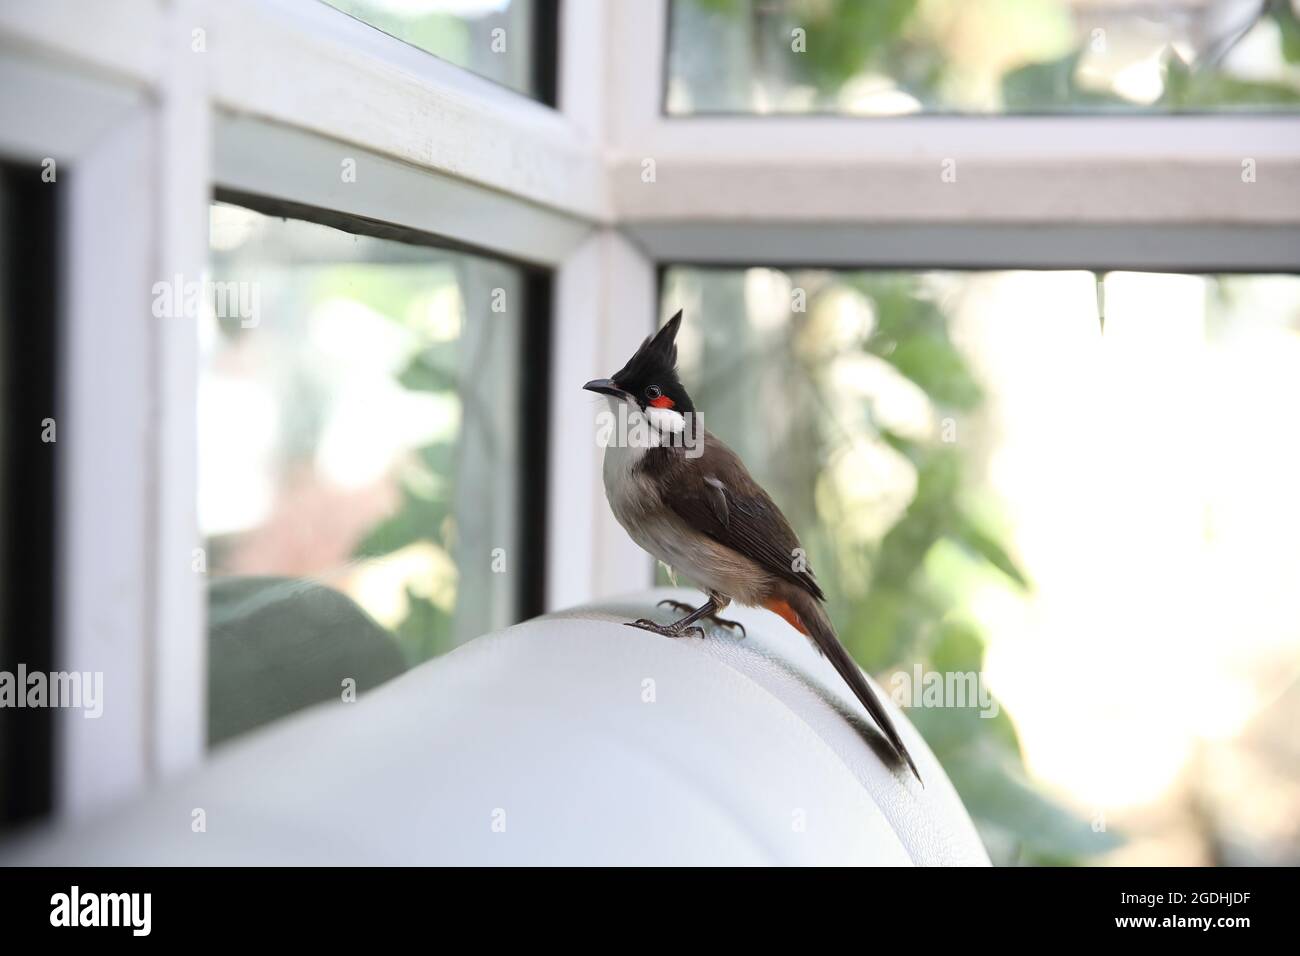 Red whiskered bulbul bird in close up Stock Photo